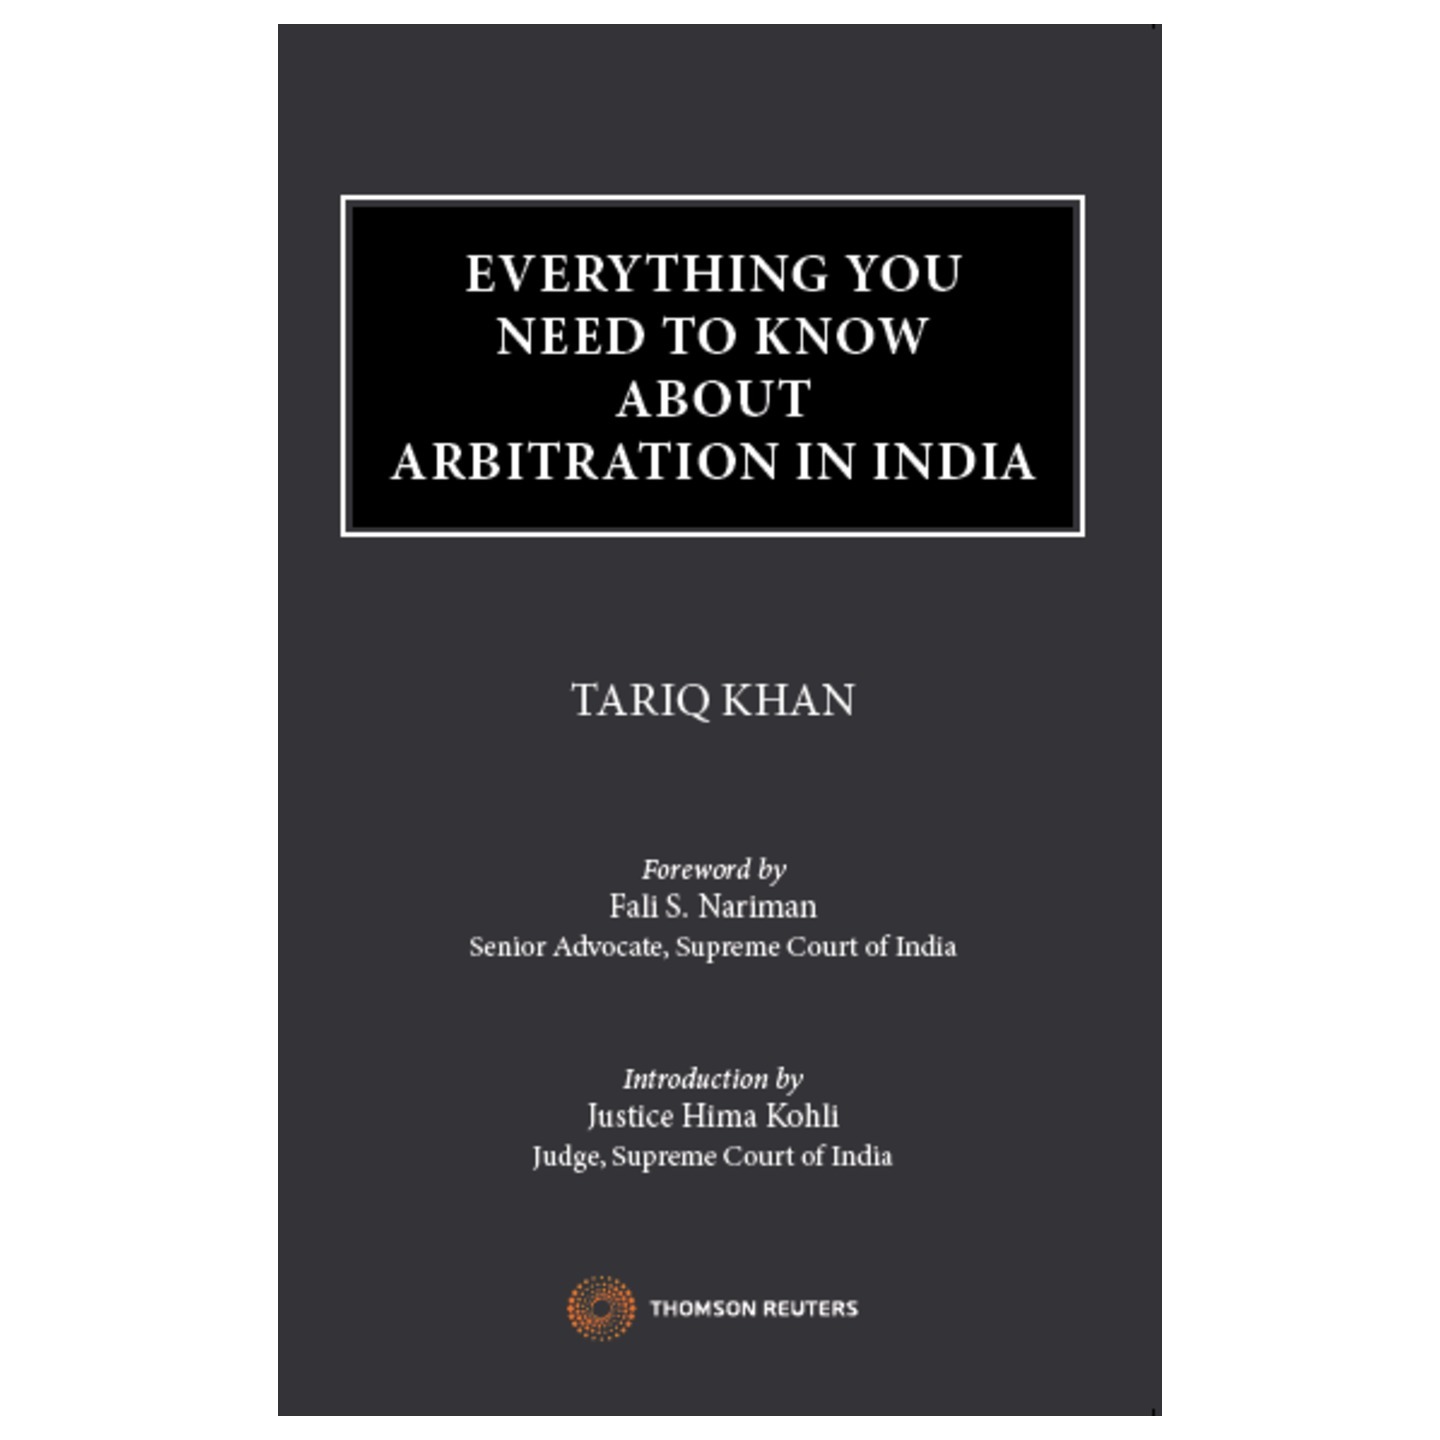 Everything You Need to Know about Arbitration in India